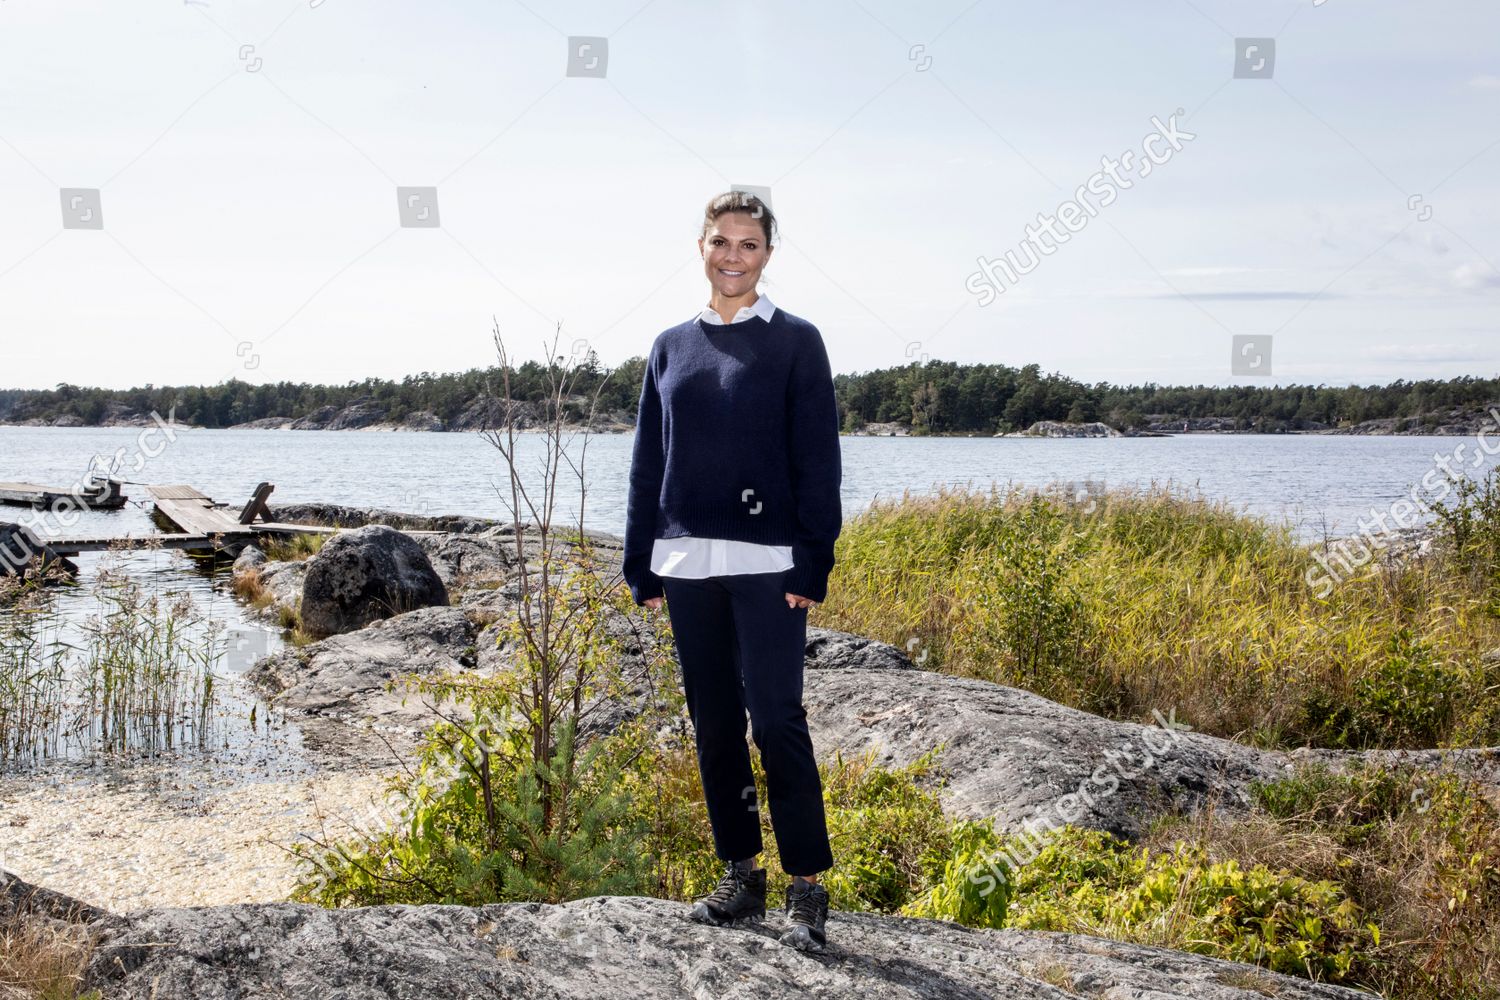 crown-princess-victoria-and-her-dog-rio-visit-alo-and-uto-sweden-shutterstock-editorial-12361980z.jpg